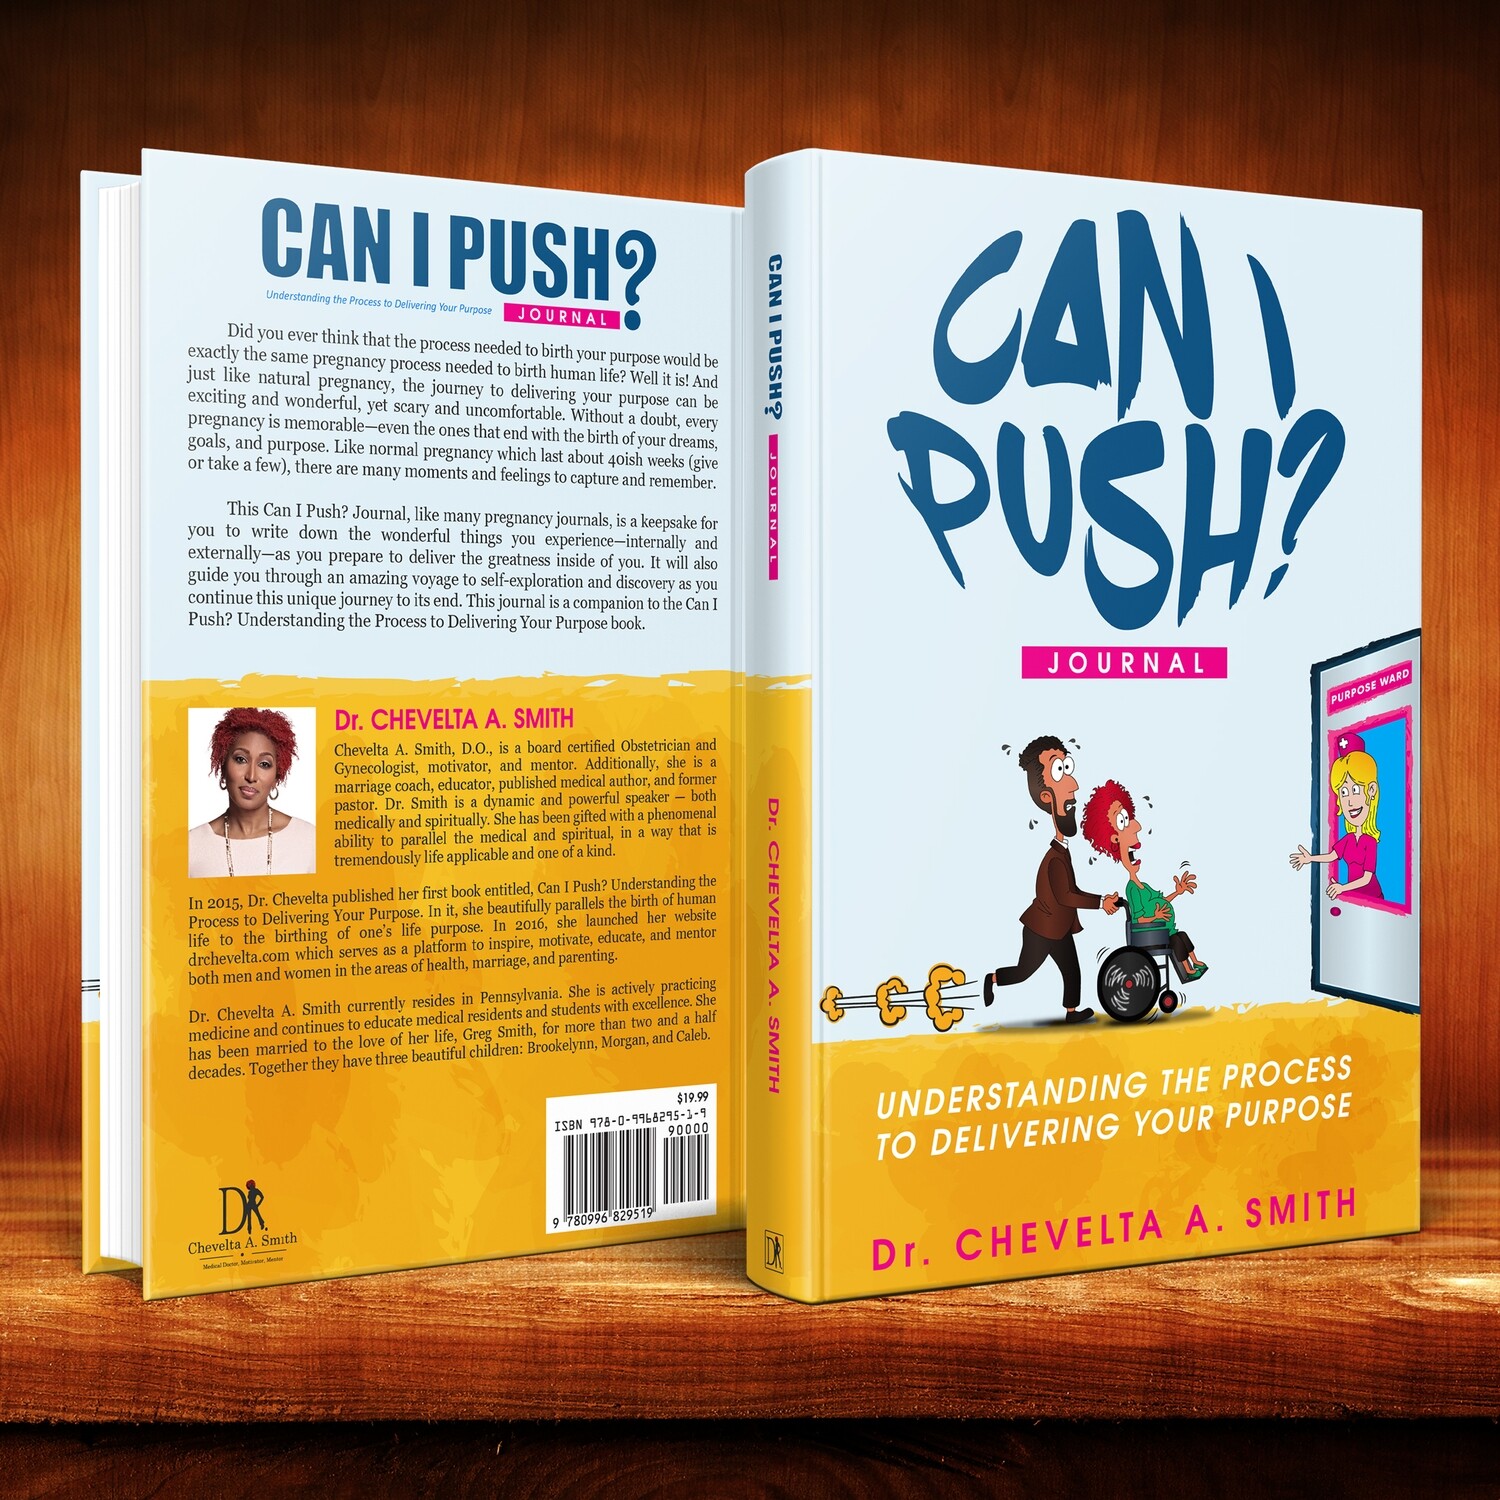 300 COPIES:
Can I Push? Journal